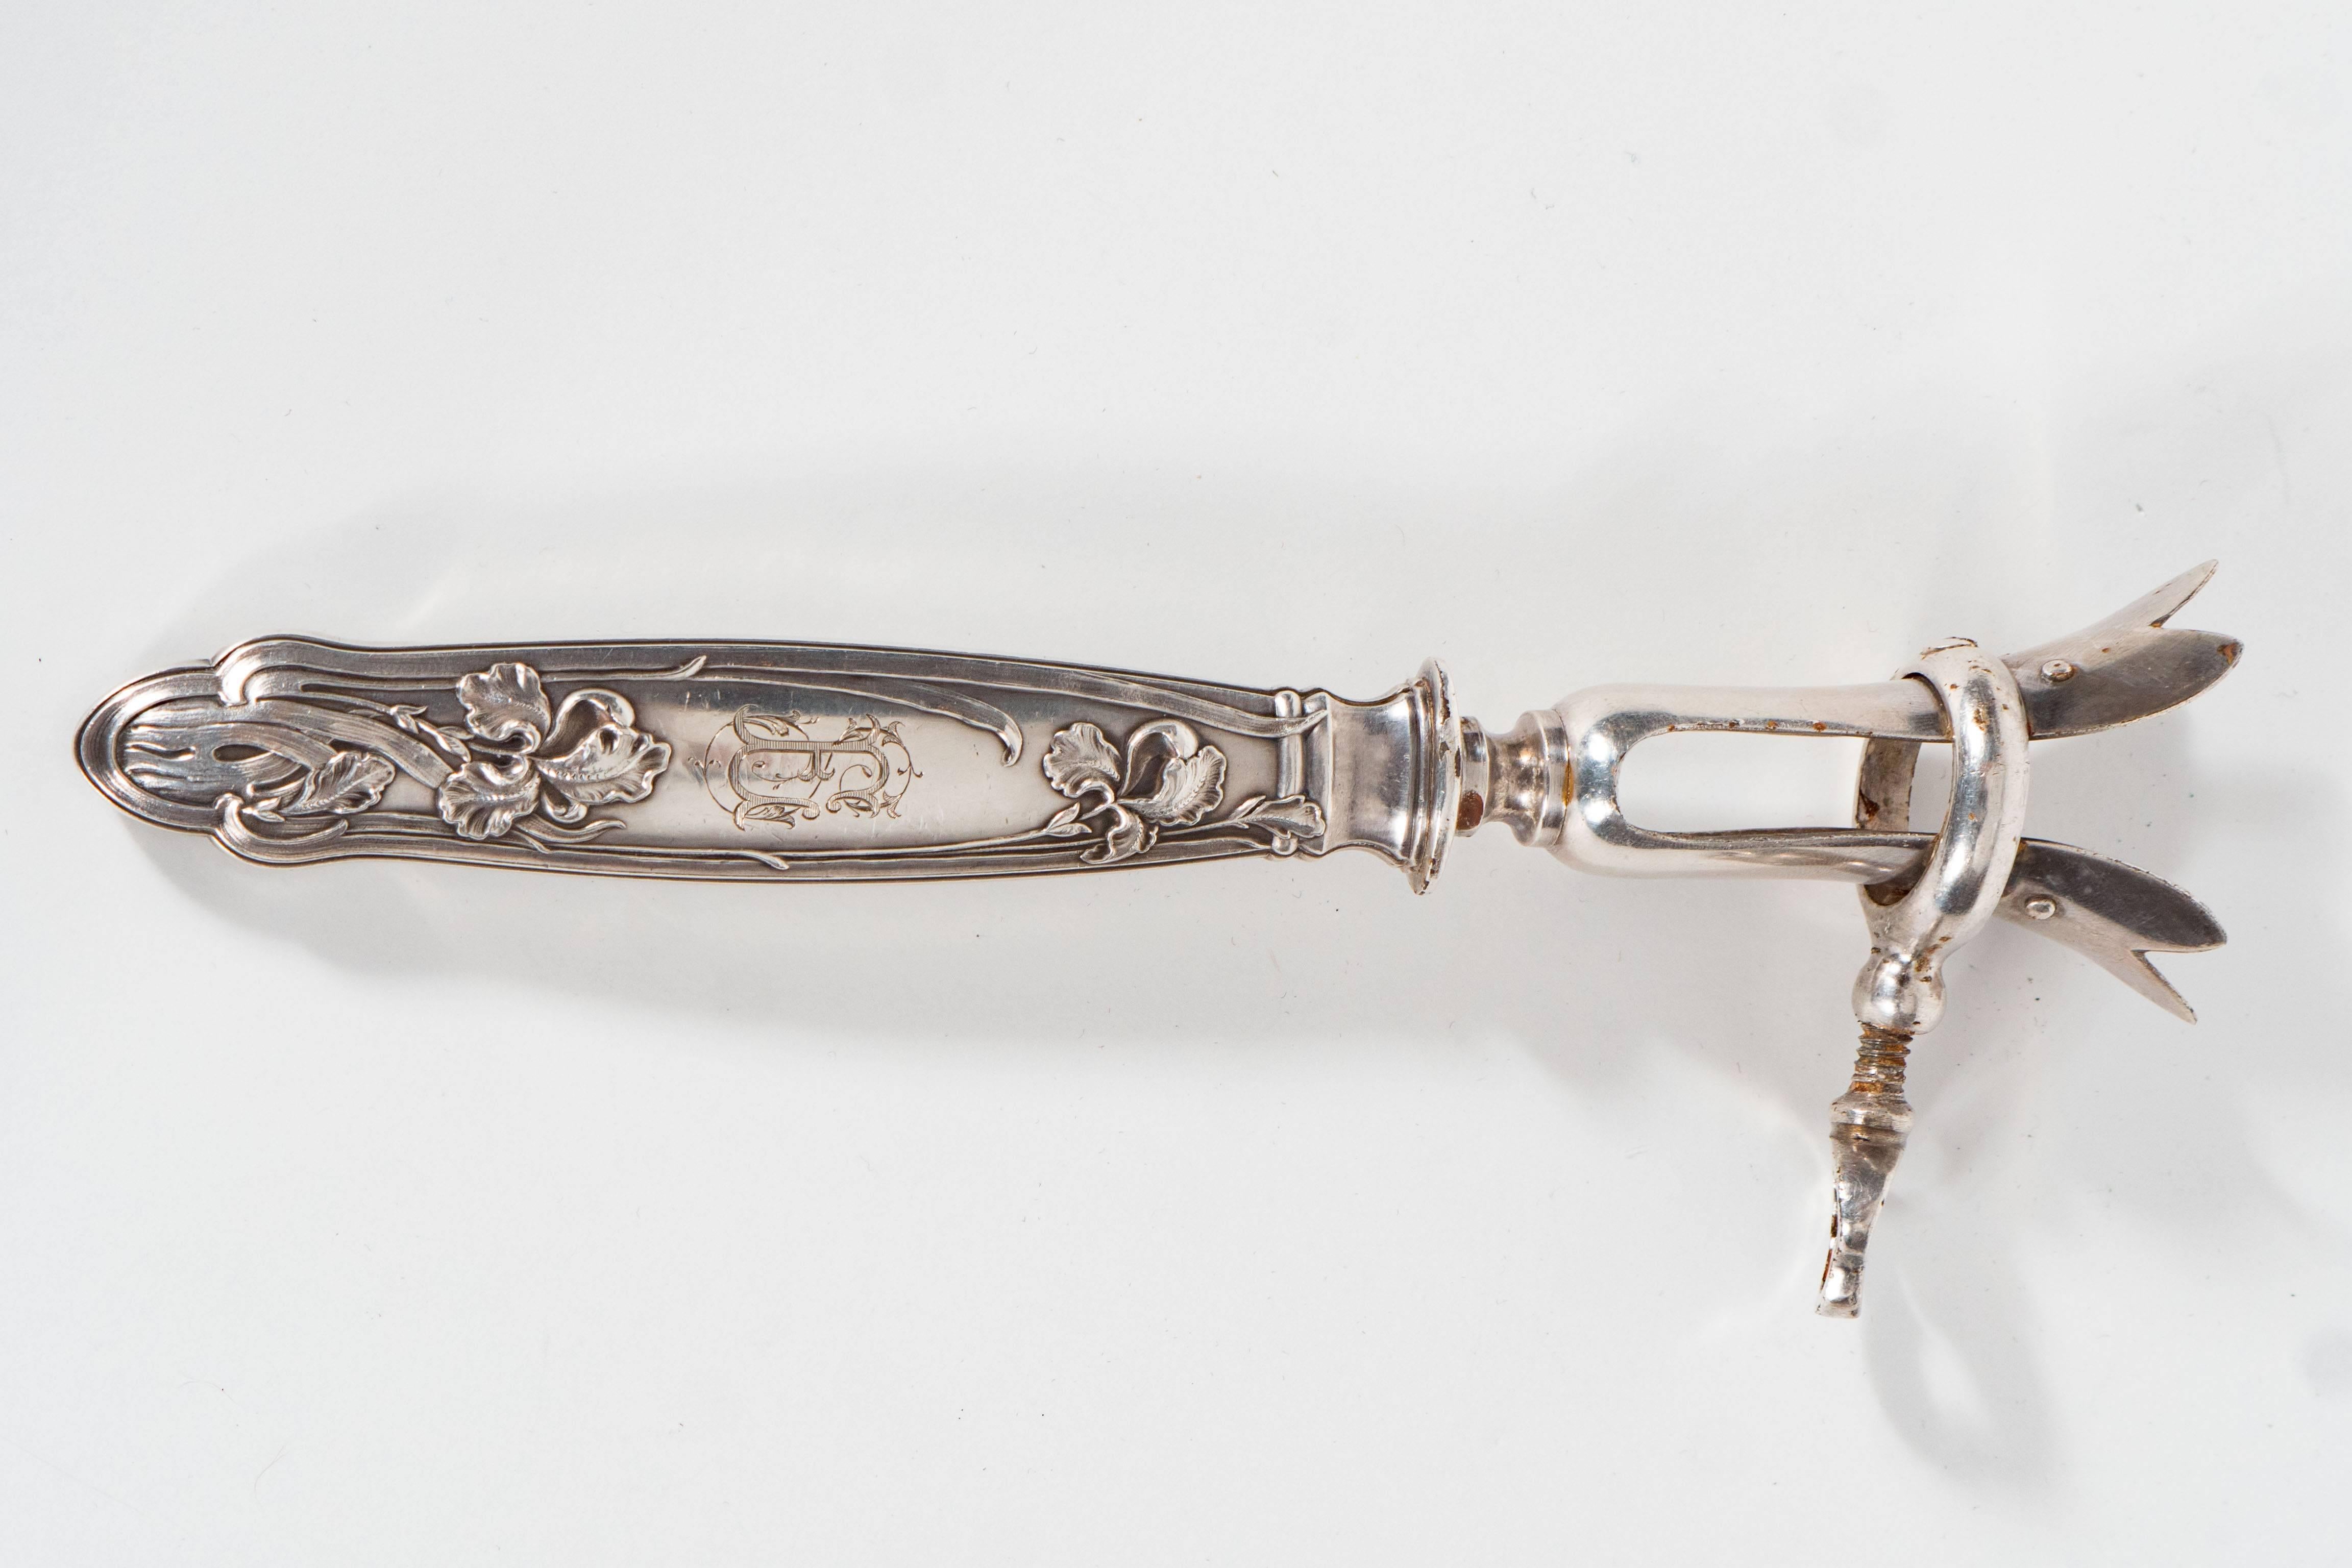 This exquisite Sterling silver joint holder features an elegant iris and foliate motif on the handle, an inscribed Gothic 